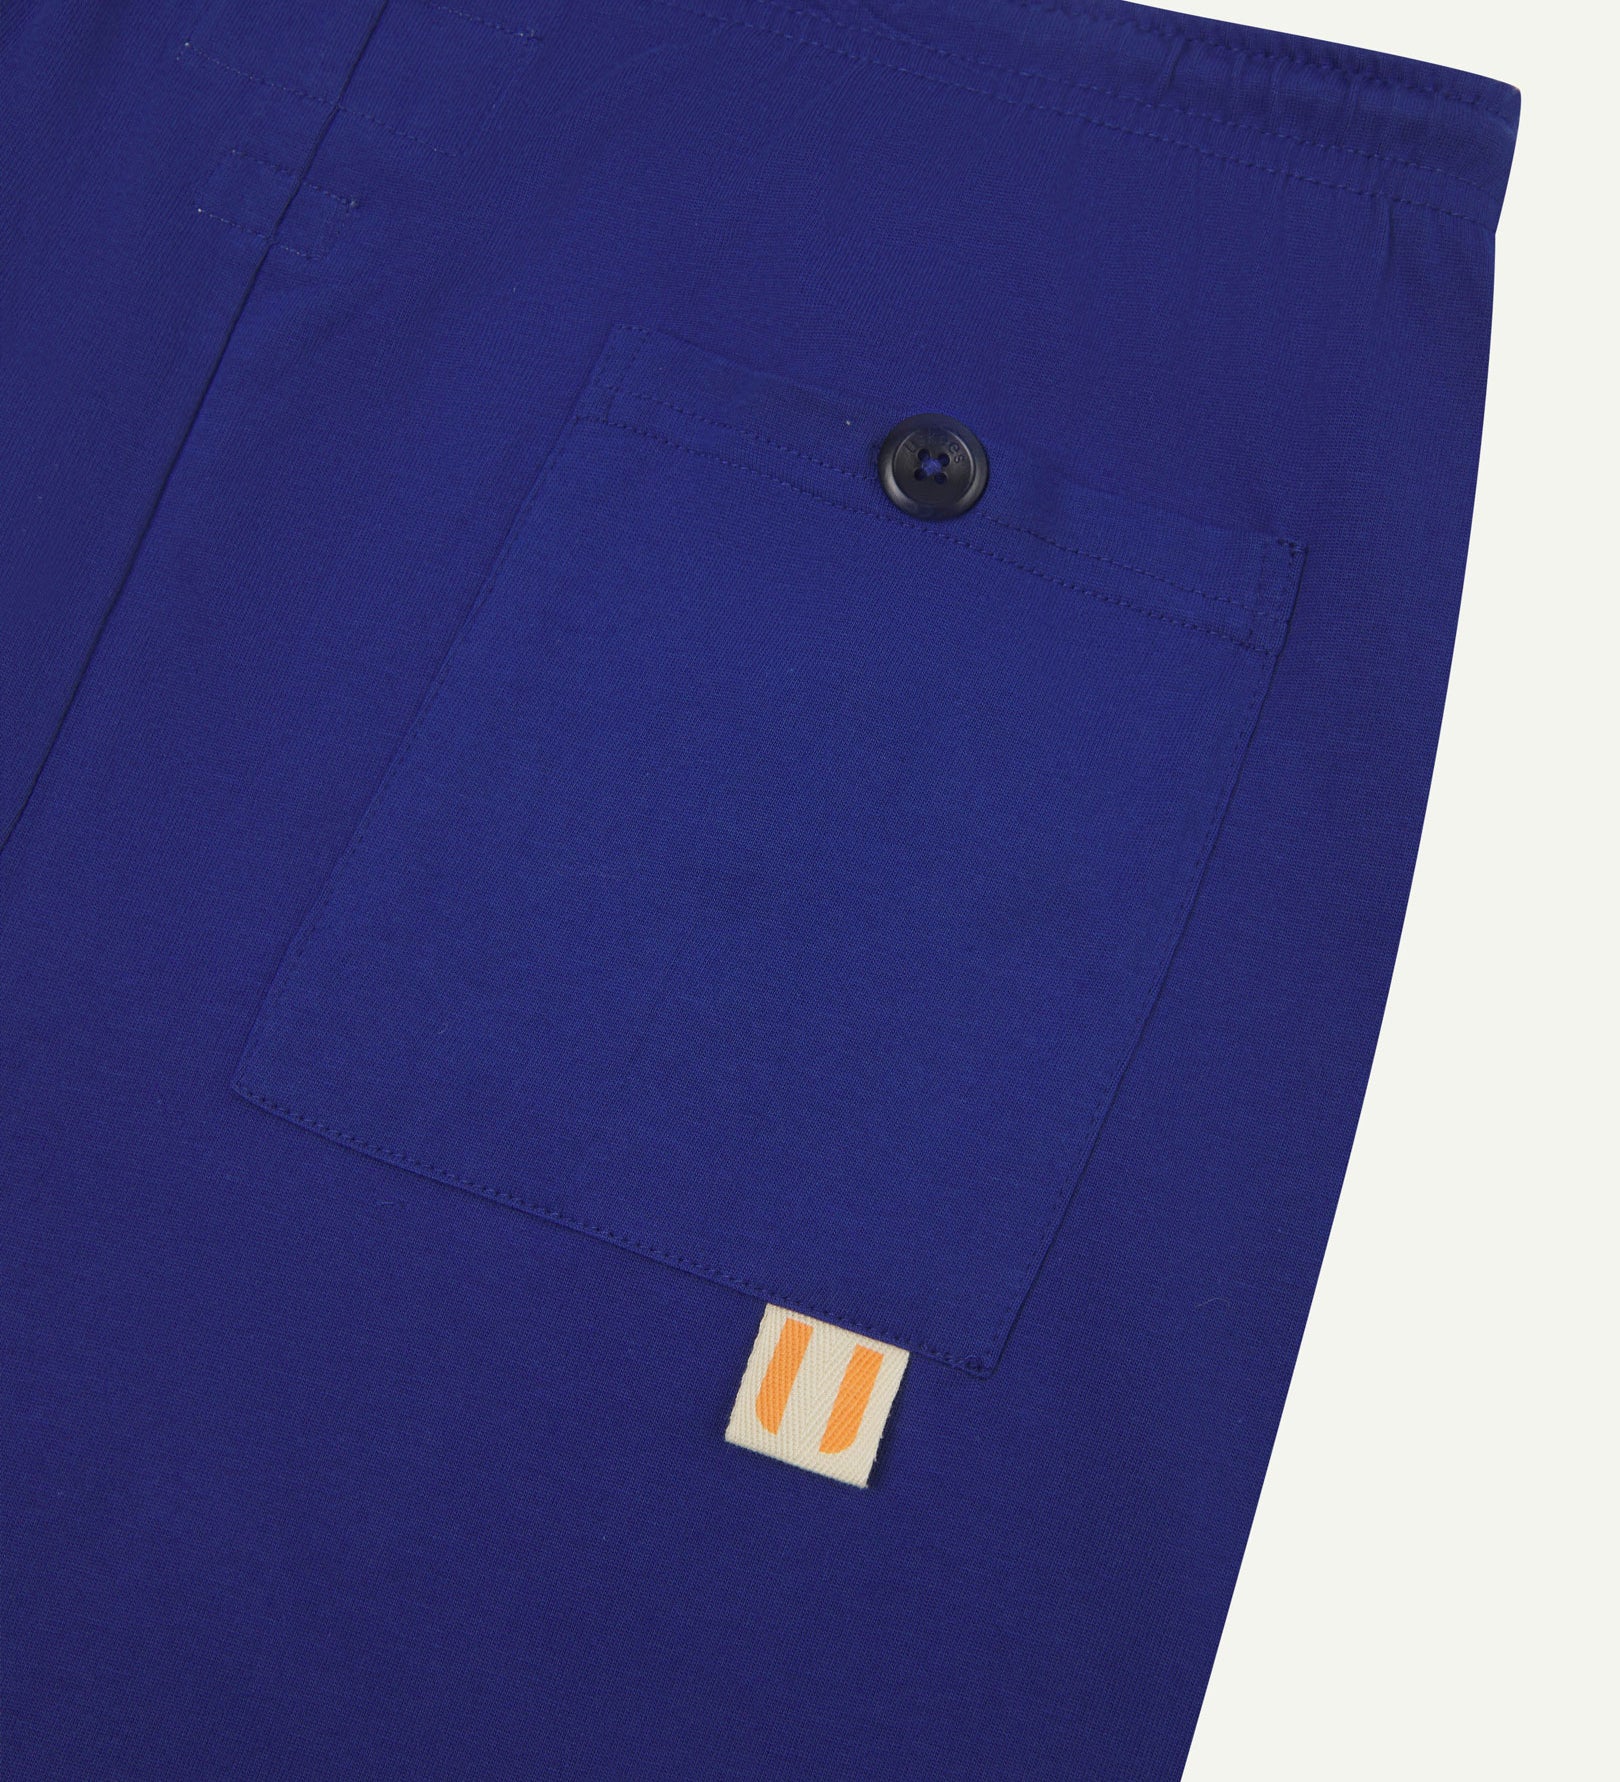 Close-up view of ultra blue organic cotton 7007 men's shorts against white background. Clear view of buttoned back pocket and Uskees logo label.